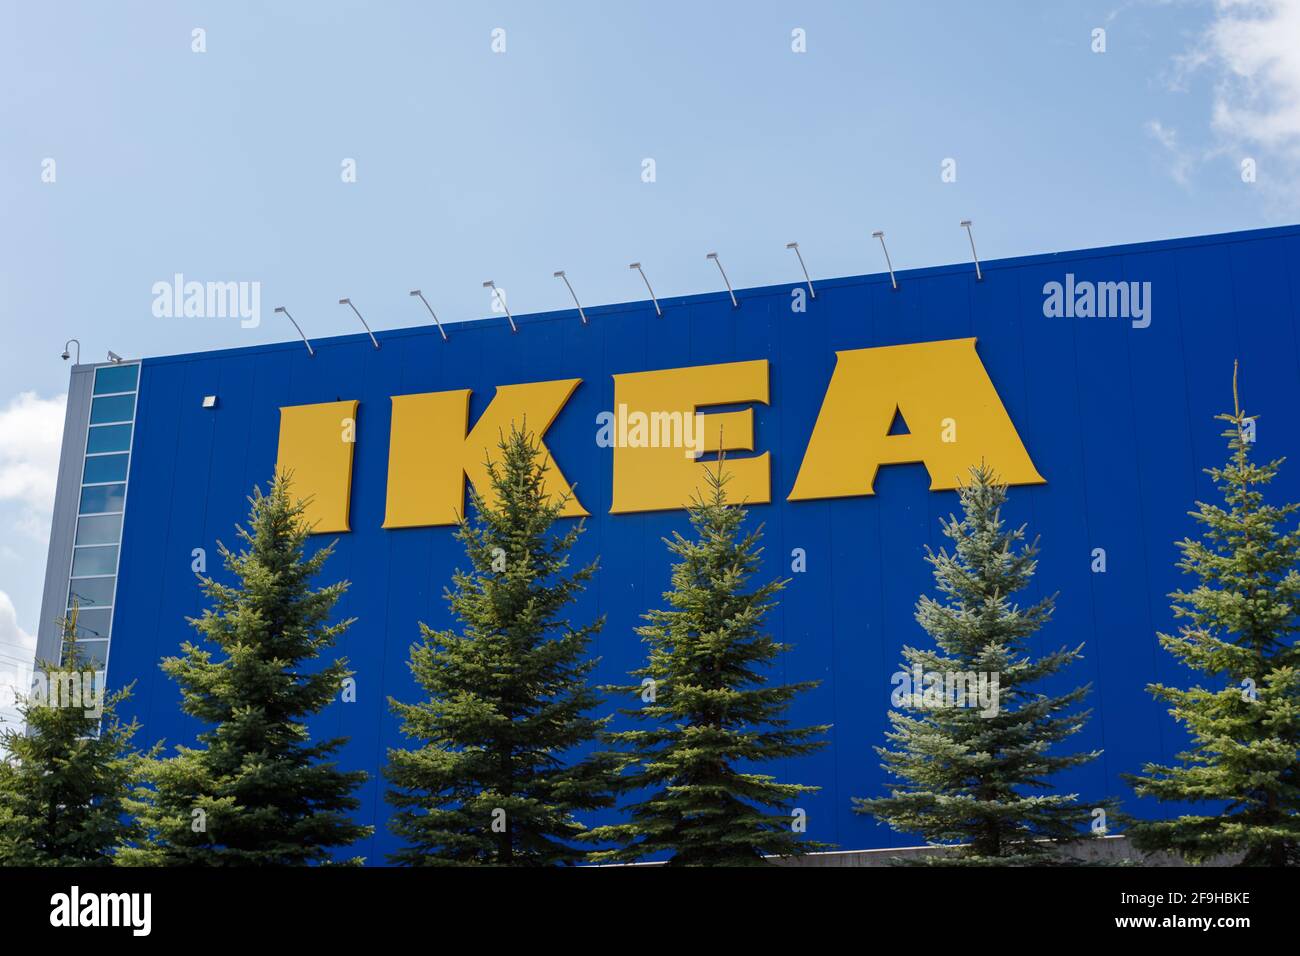 Ottawa, Ontario, Canada - April 18, 2021: The IKEA logo on the side of a  blue wall at the Swedish chain's furniture store in Ottawa's Pinecrest  Shoppi Stock Photo - Alamy